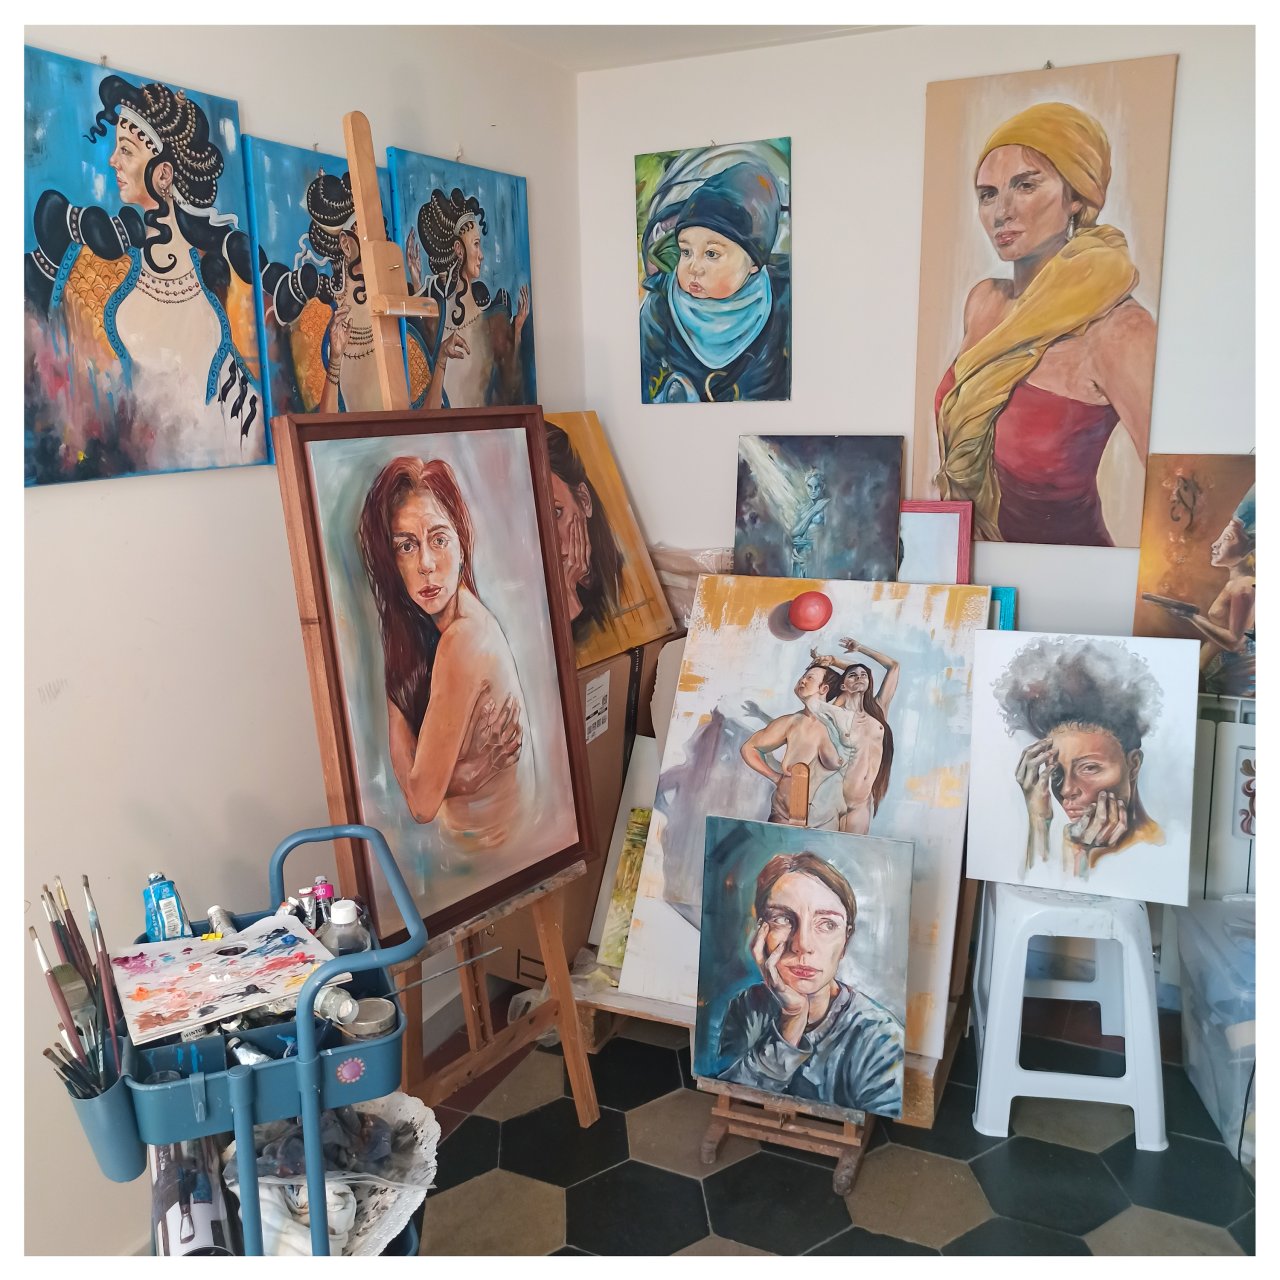 Some works in studio